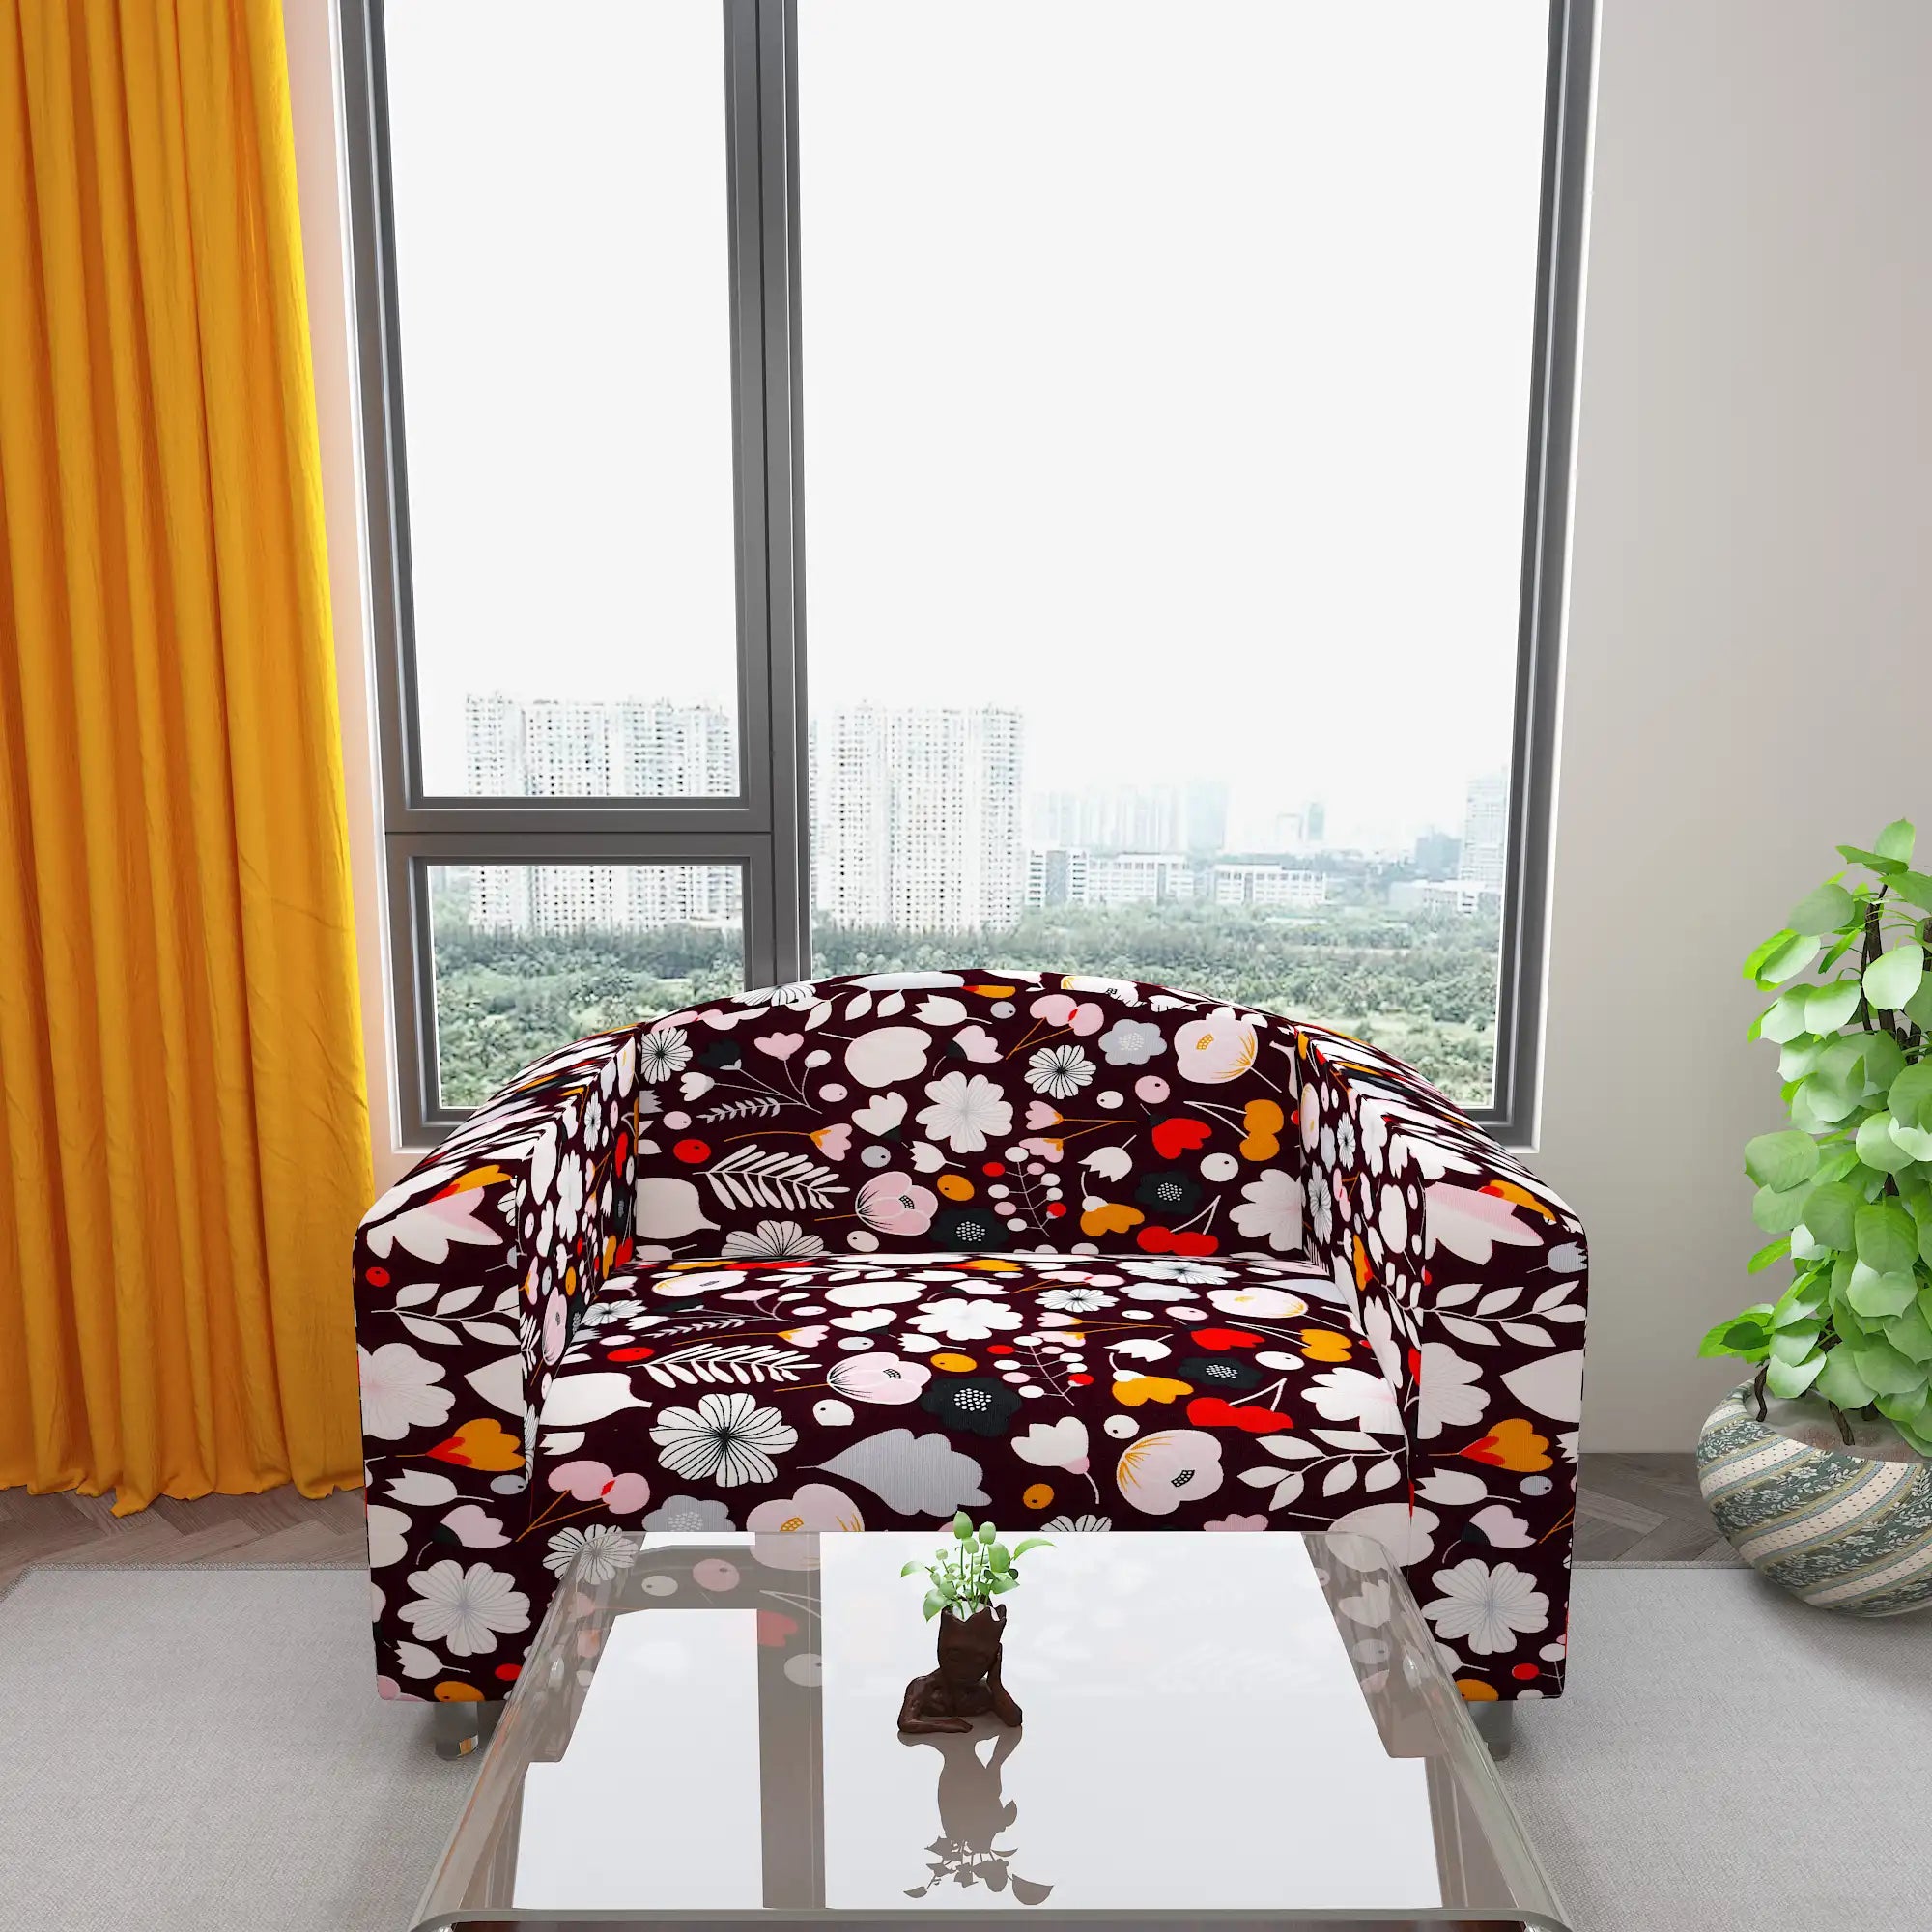 Waterproof Printed Sofa Protector Cover Full Stretchable, SP06